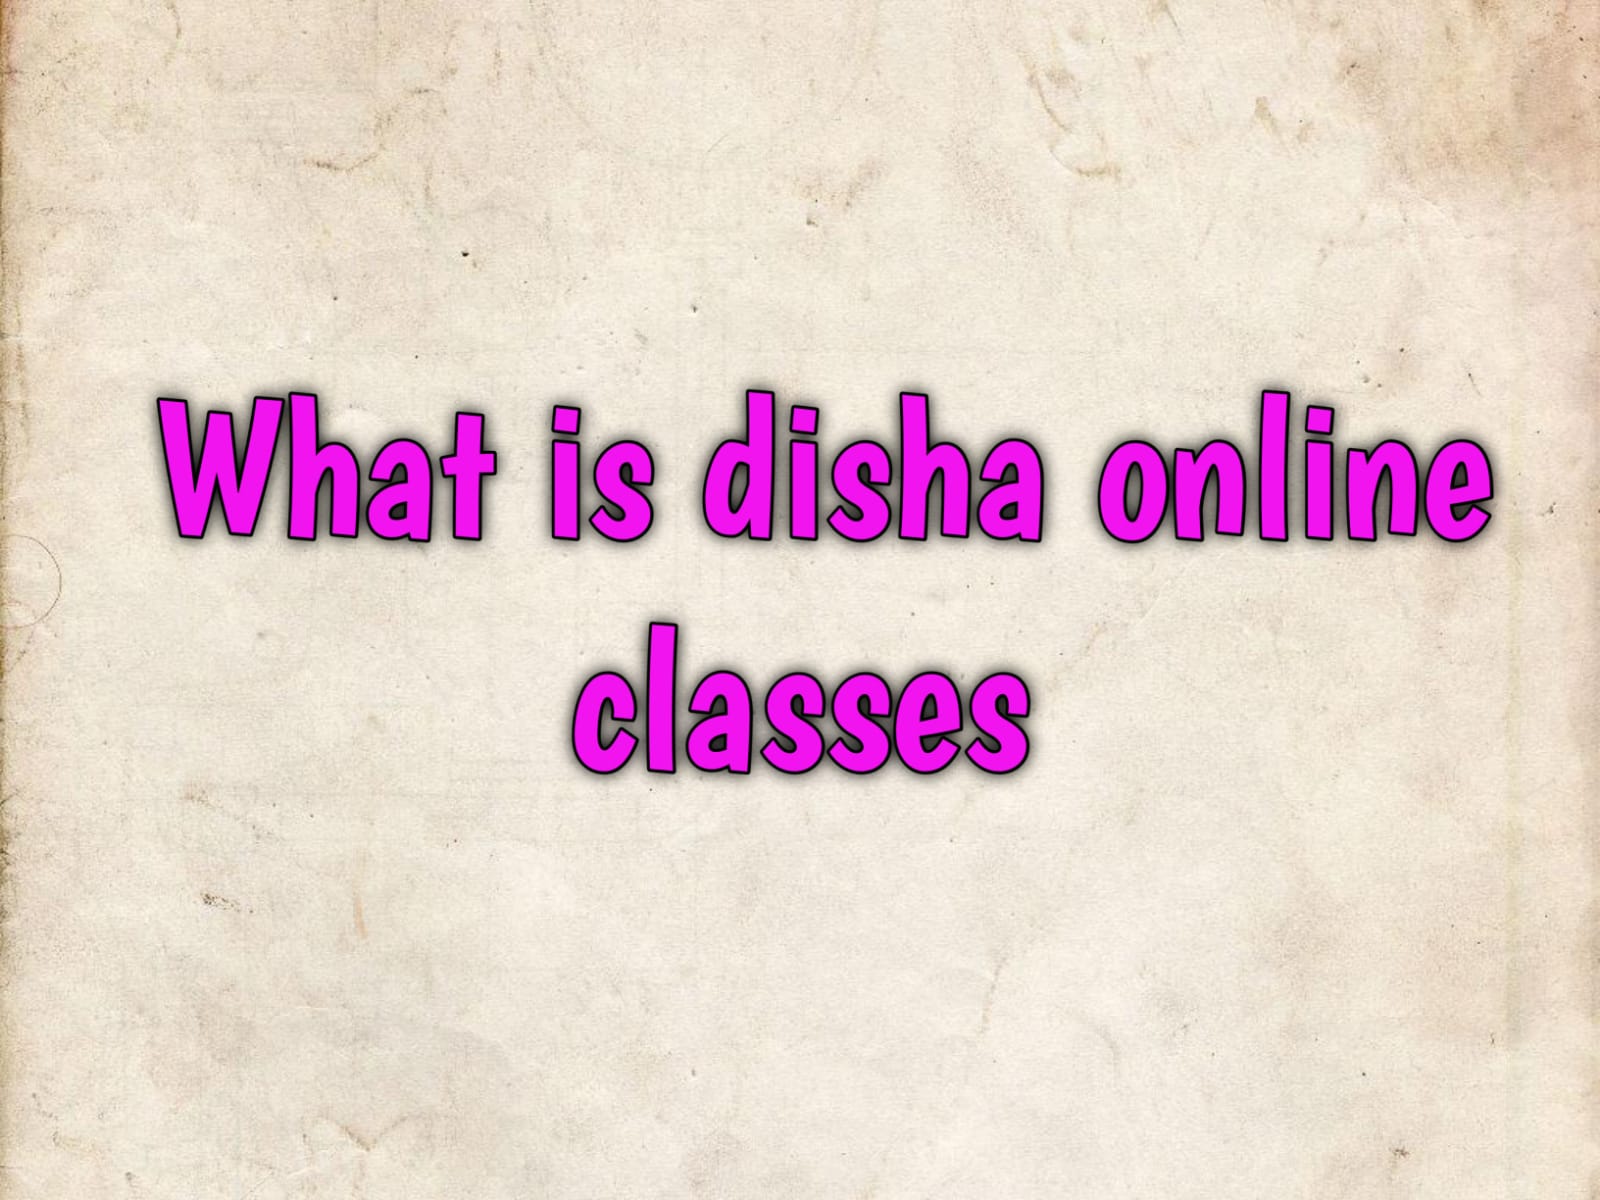 Whats is the disha online classes